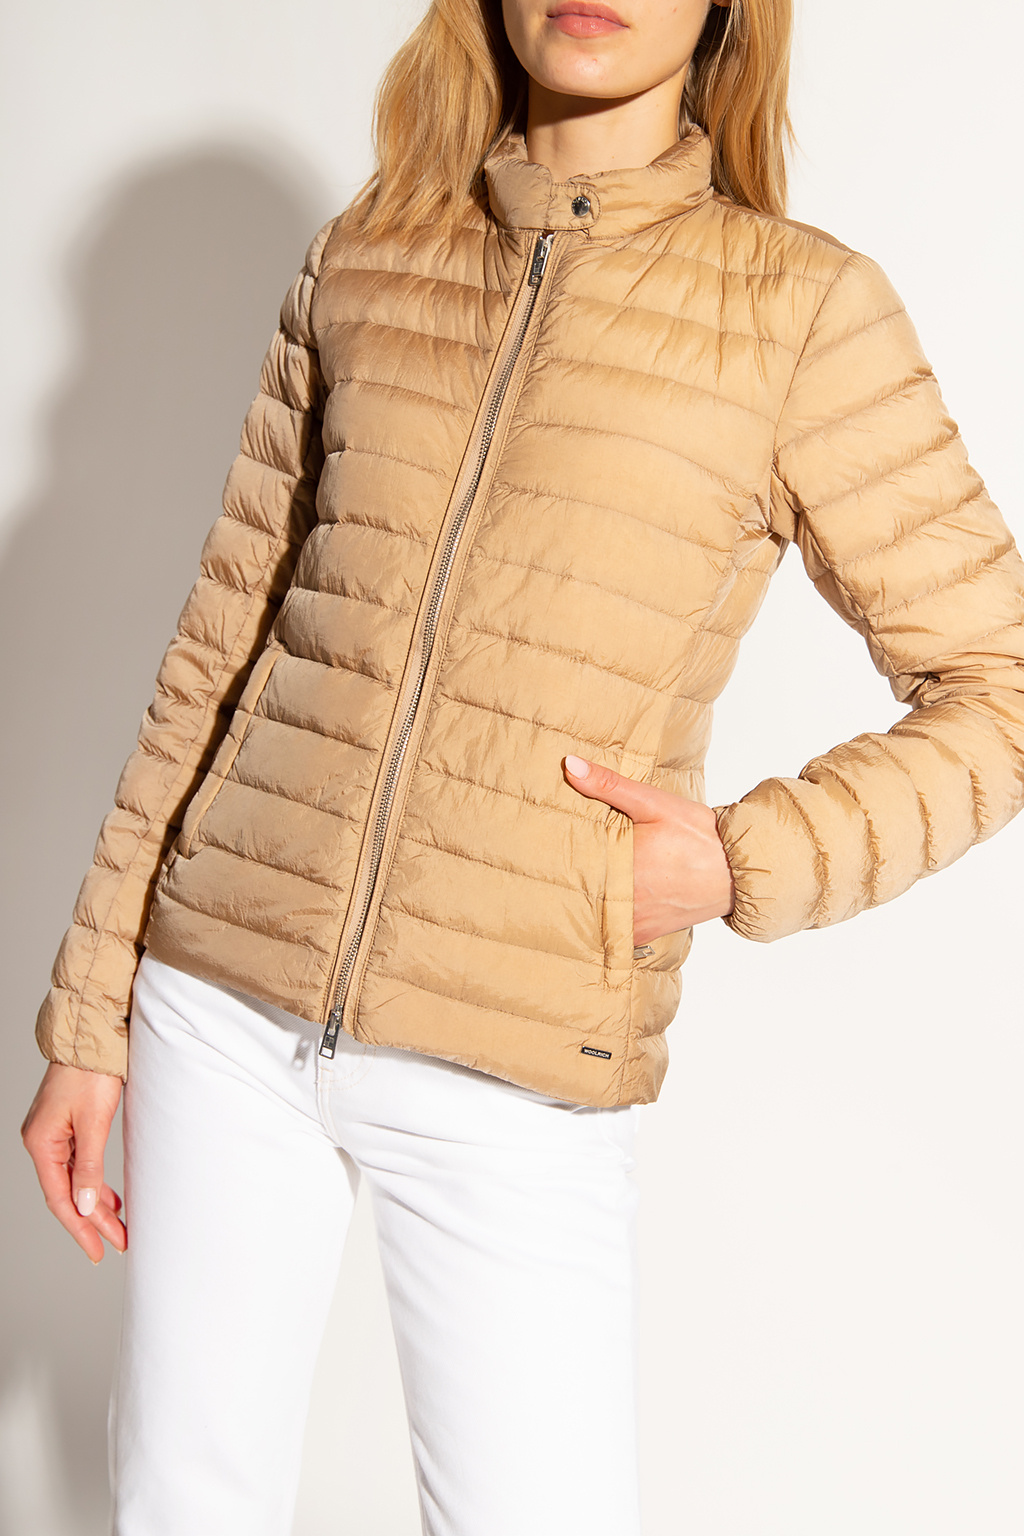 Woolrich Quilted jacket with high neck